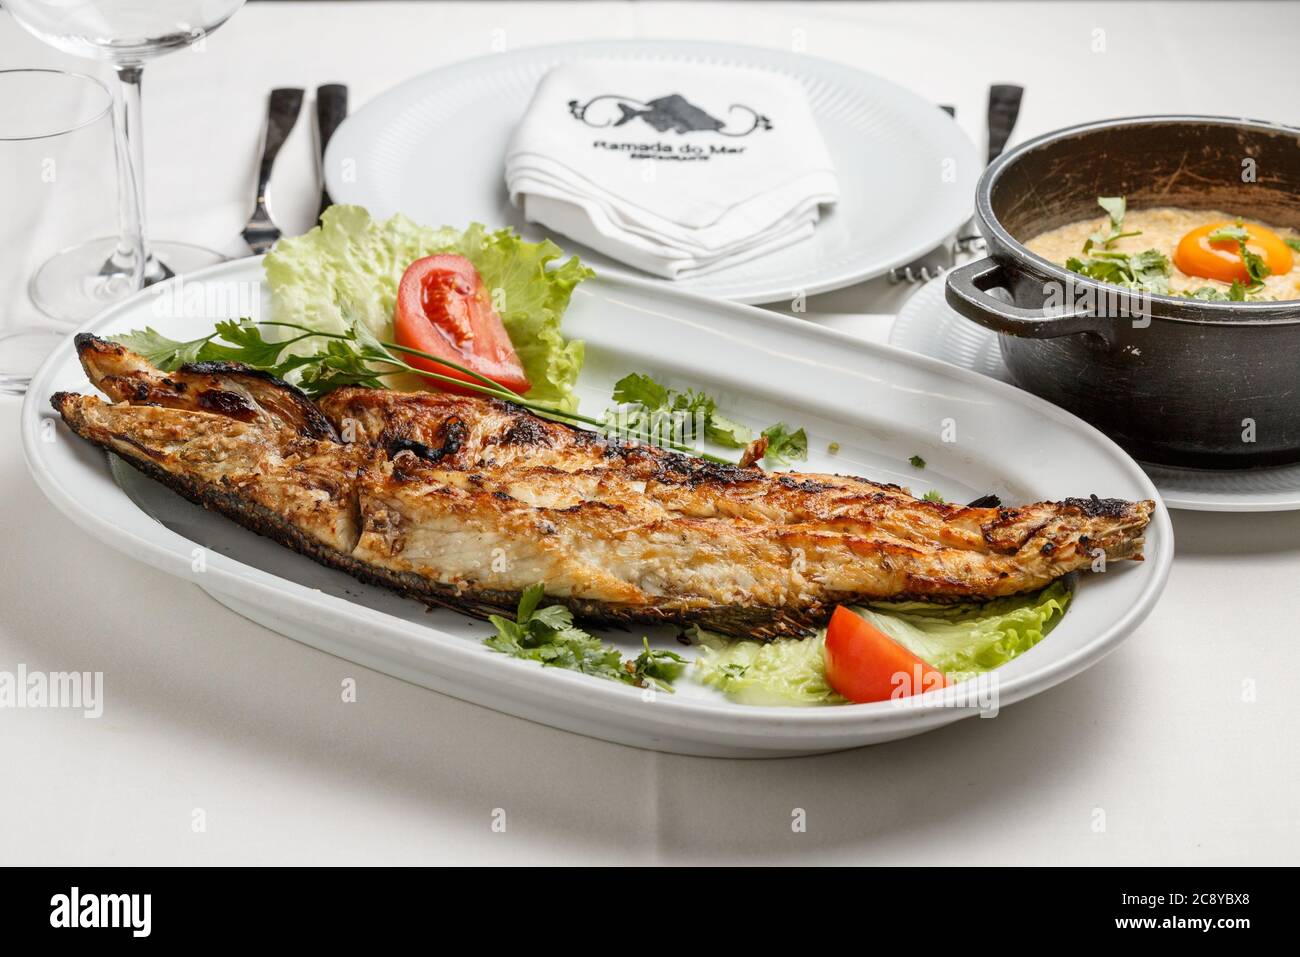 Fried fish near slices of letus on a white plate Stock Photo